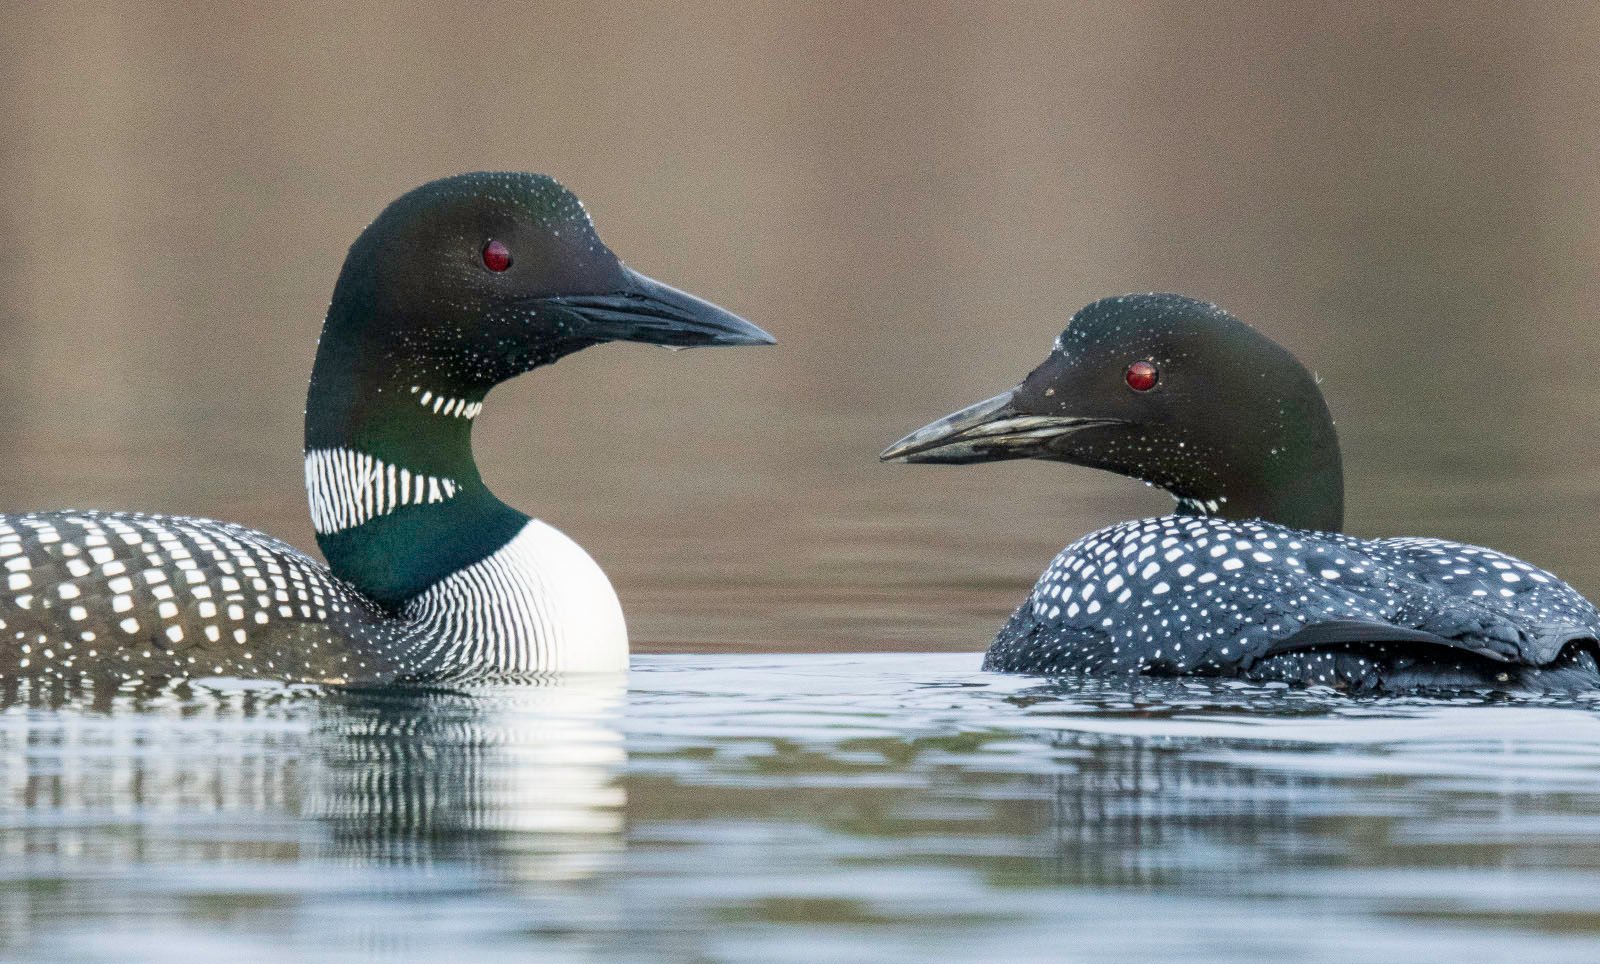 Two common loons, sporting black and white plumage and distinctive red eyes, float close together on calm water. their sleek black heads are turned slightly towards each other.